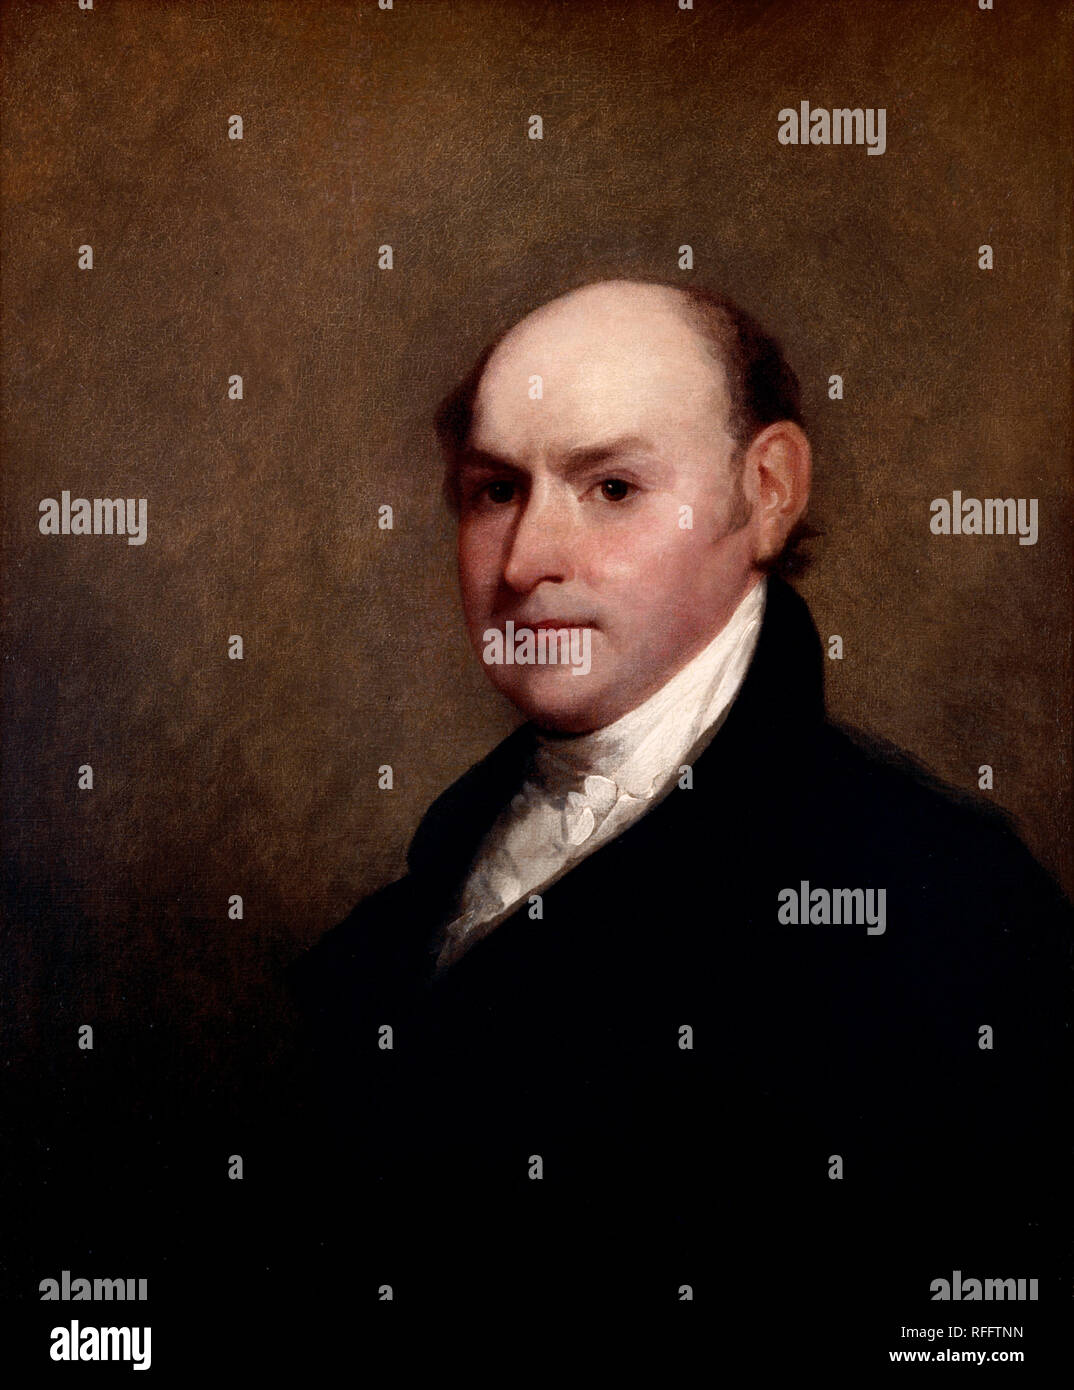 John Quincy Adams. Date/Period: 1818. Painting. Oil on panel oil on panel. Height: 679.45 mm (26.75 in); Width: 558.80 mm (22 in). Author: GILBERT STUART. Stock Photo